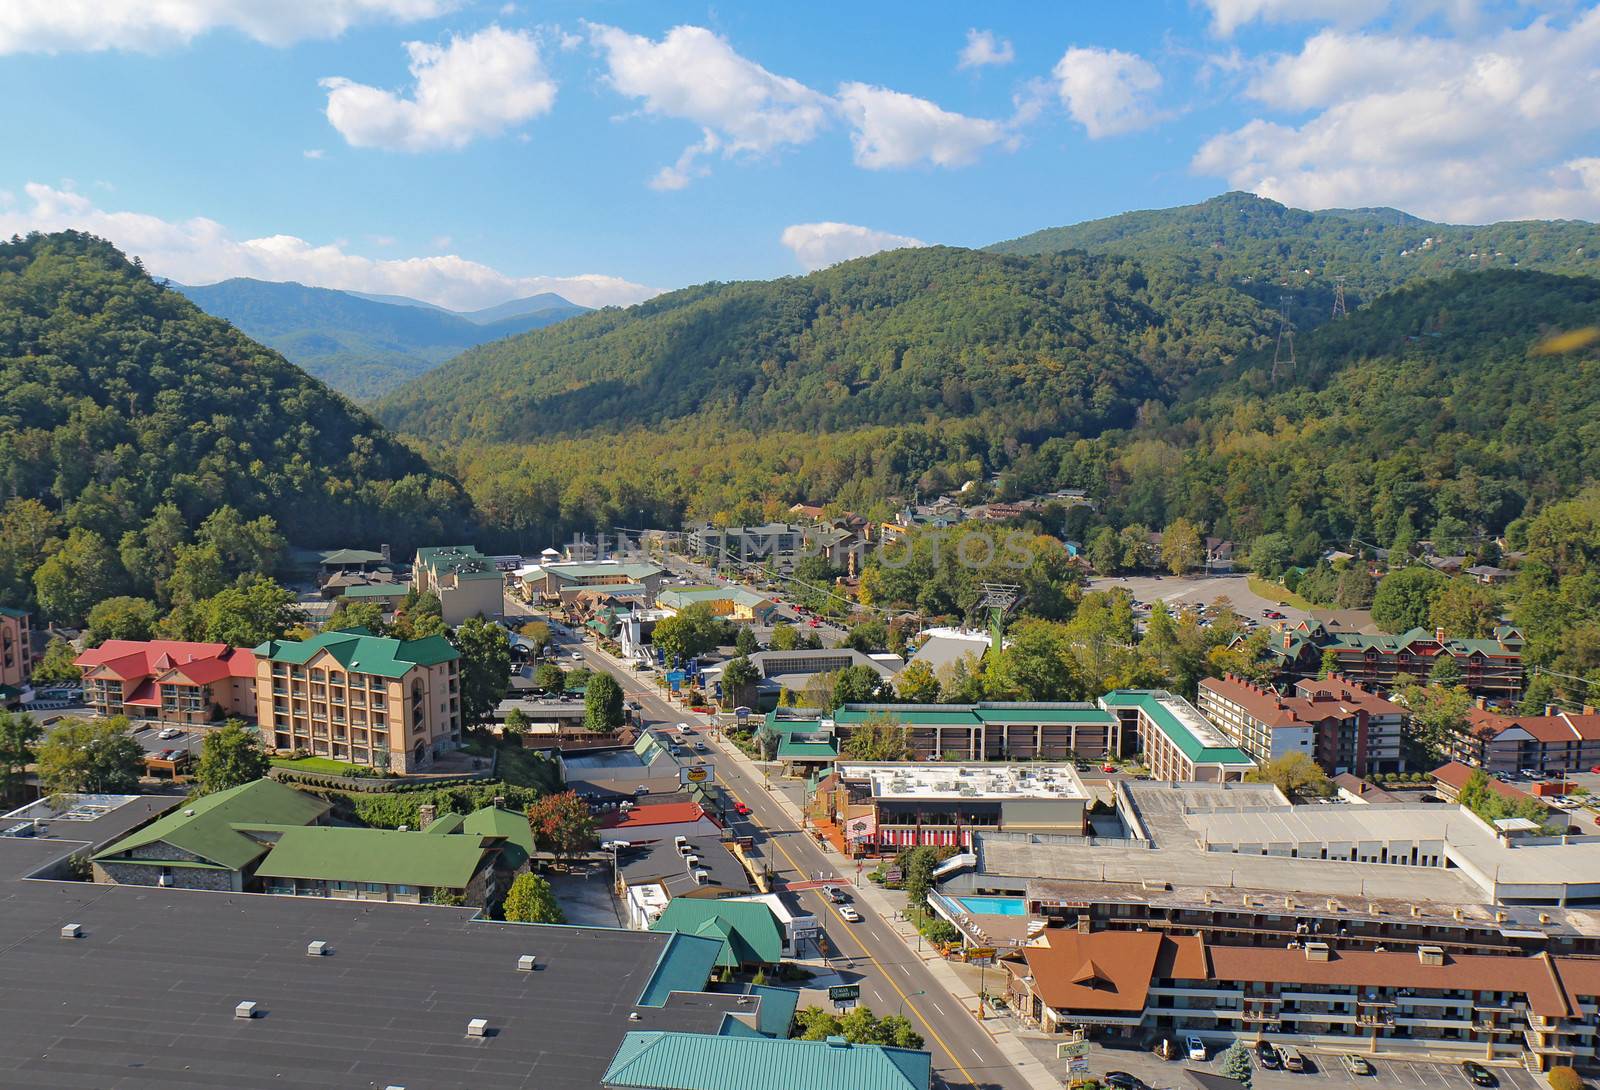 GATLINBURG, TENNESSEE - OCTOBER 6: Aerial wide angle view of Gatlinburg, Tennessee on October 6, 2013. Gatlinburg is a major tourist destination and gateway to the Great Smoky Mountains National Park.